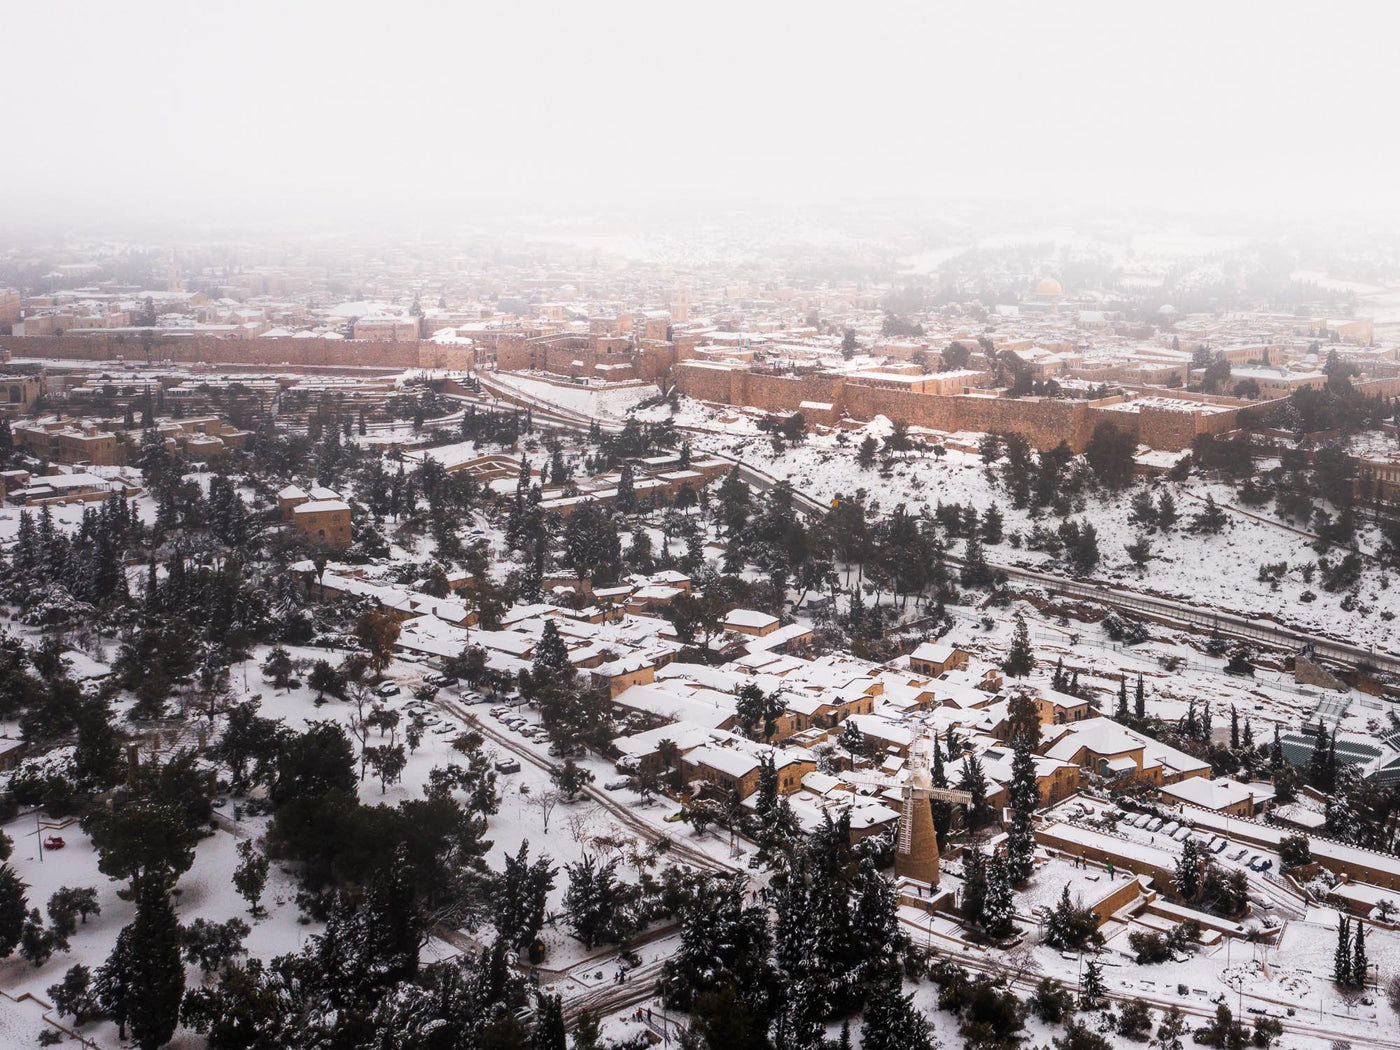 Cloaked in White - By Yehoshua Aryeh - Photograph of Israel - Jerusalem Covered in Snow